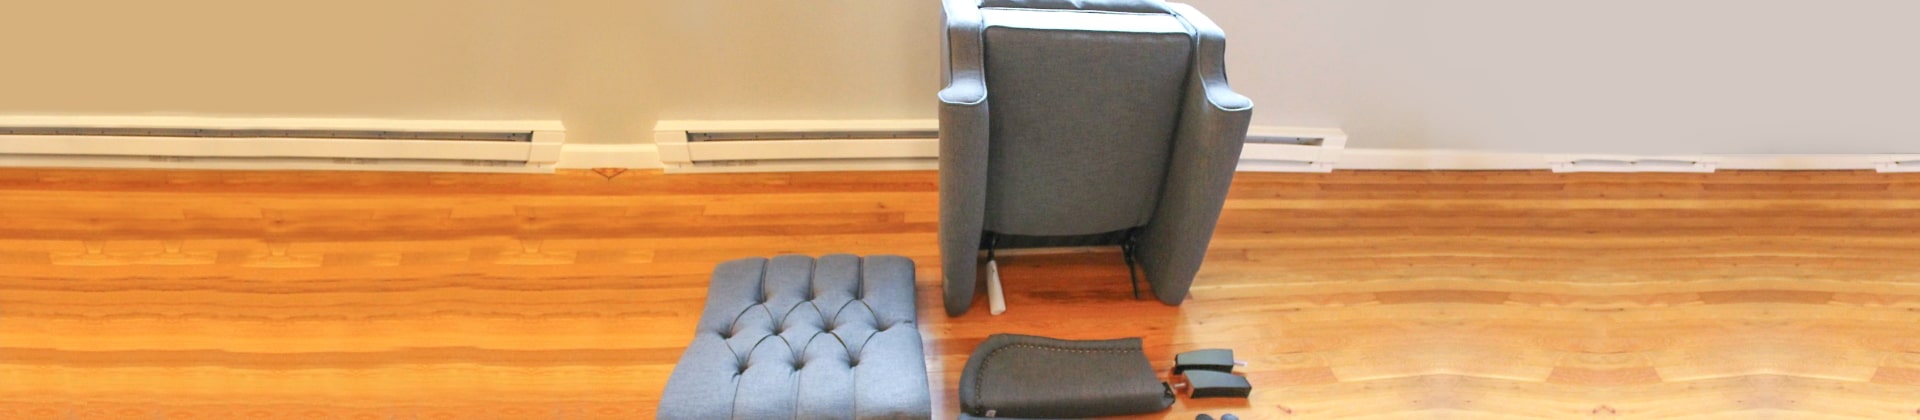 How to Take Apart a Recliner: Detailed Instructions